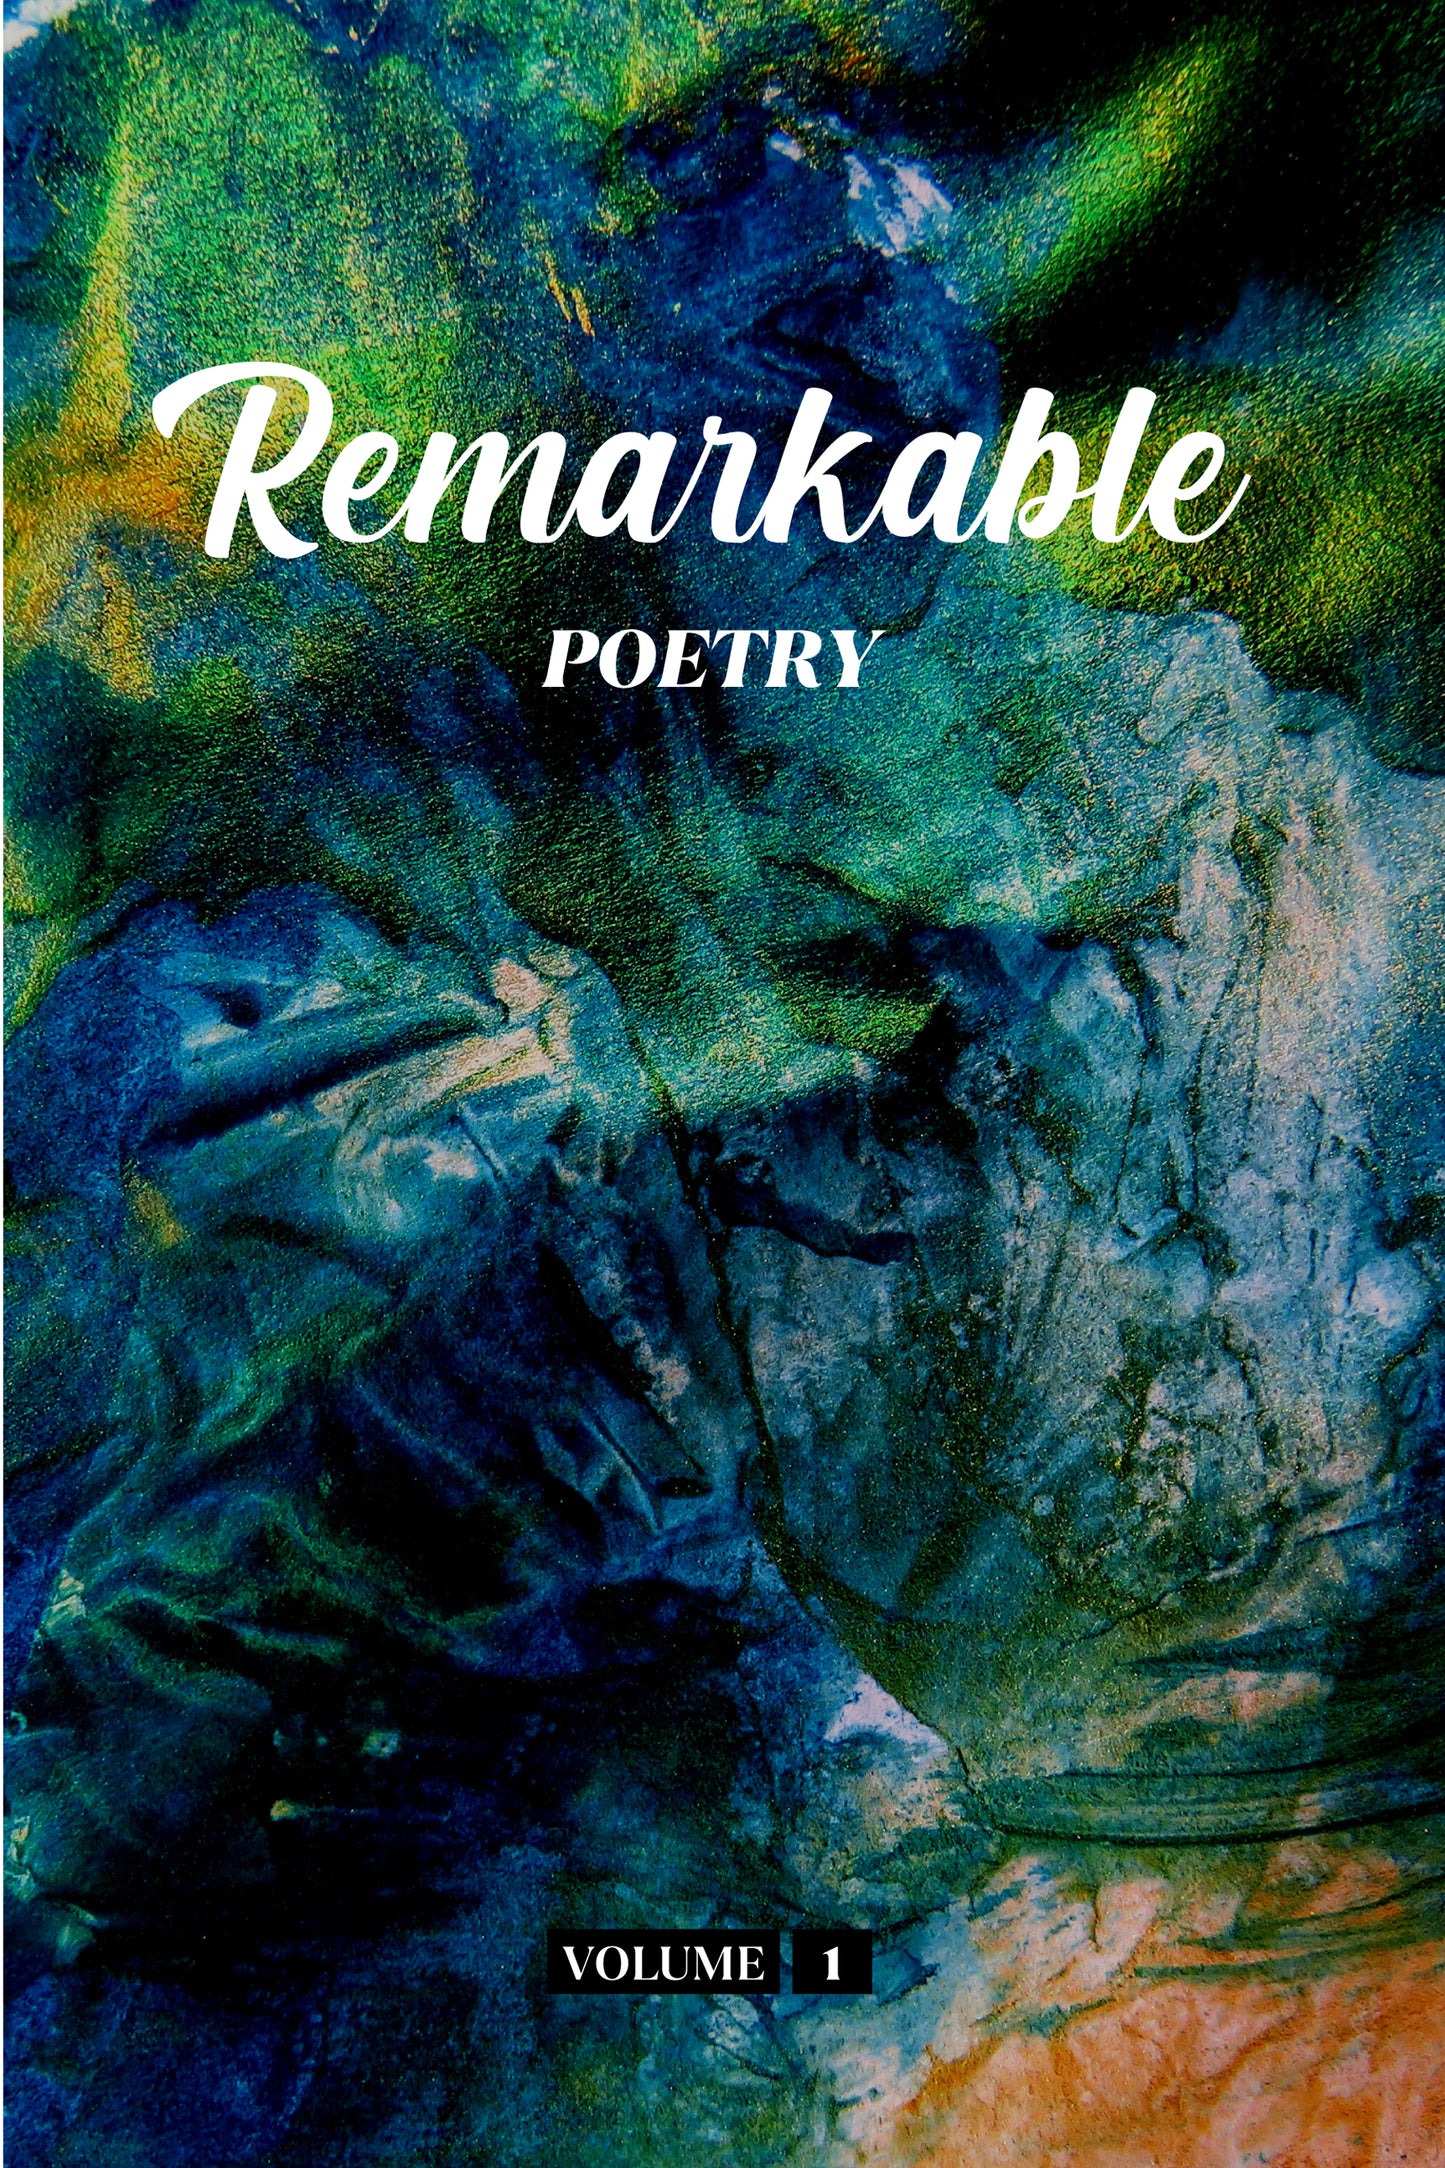 Remarkable Poetry (Volume 1) - Physical Book